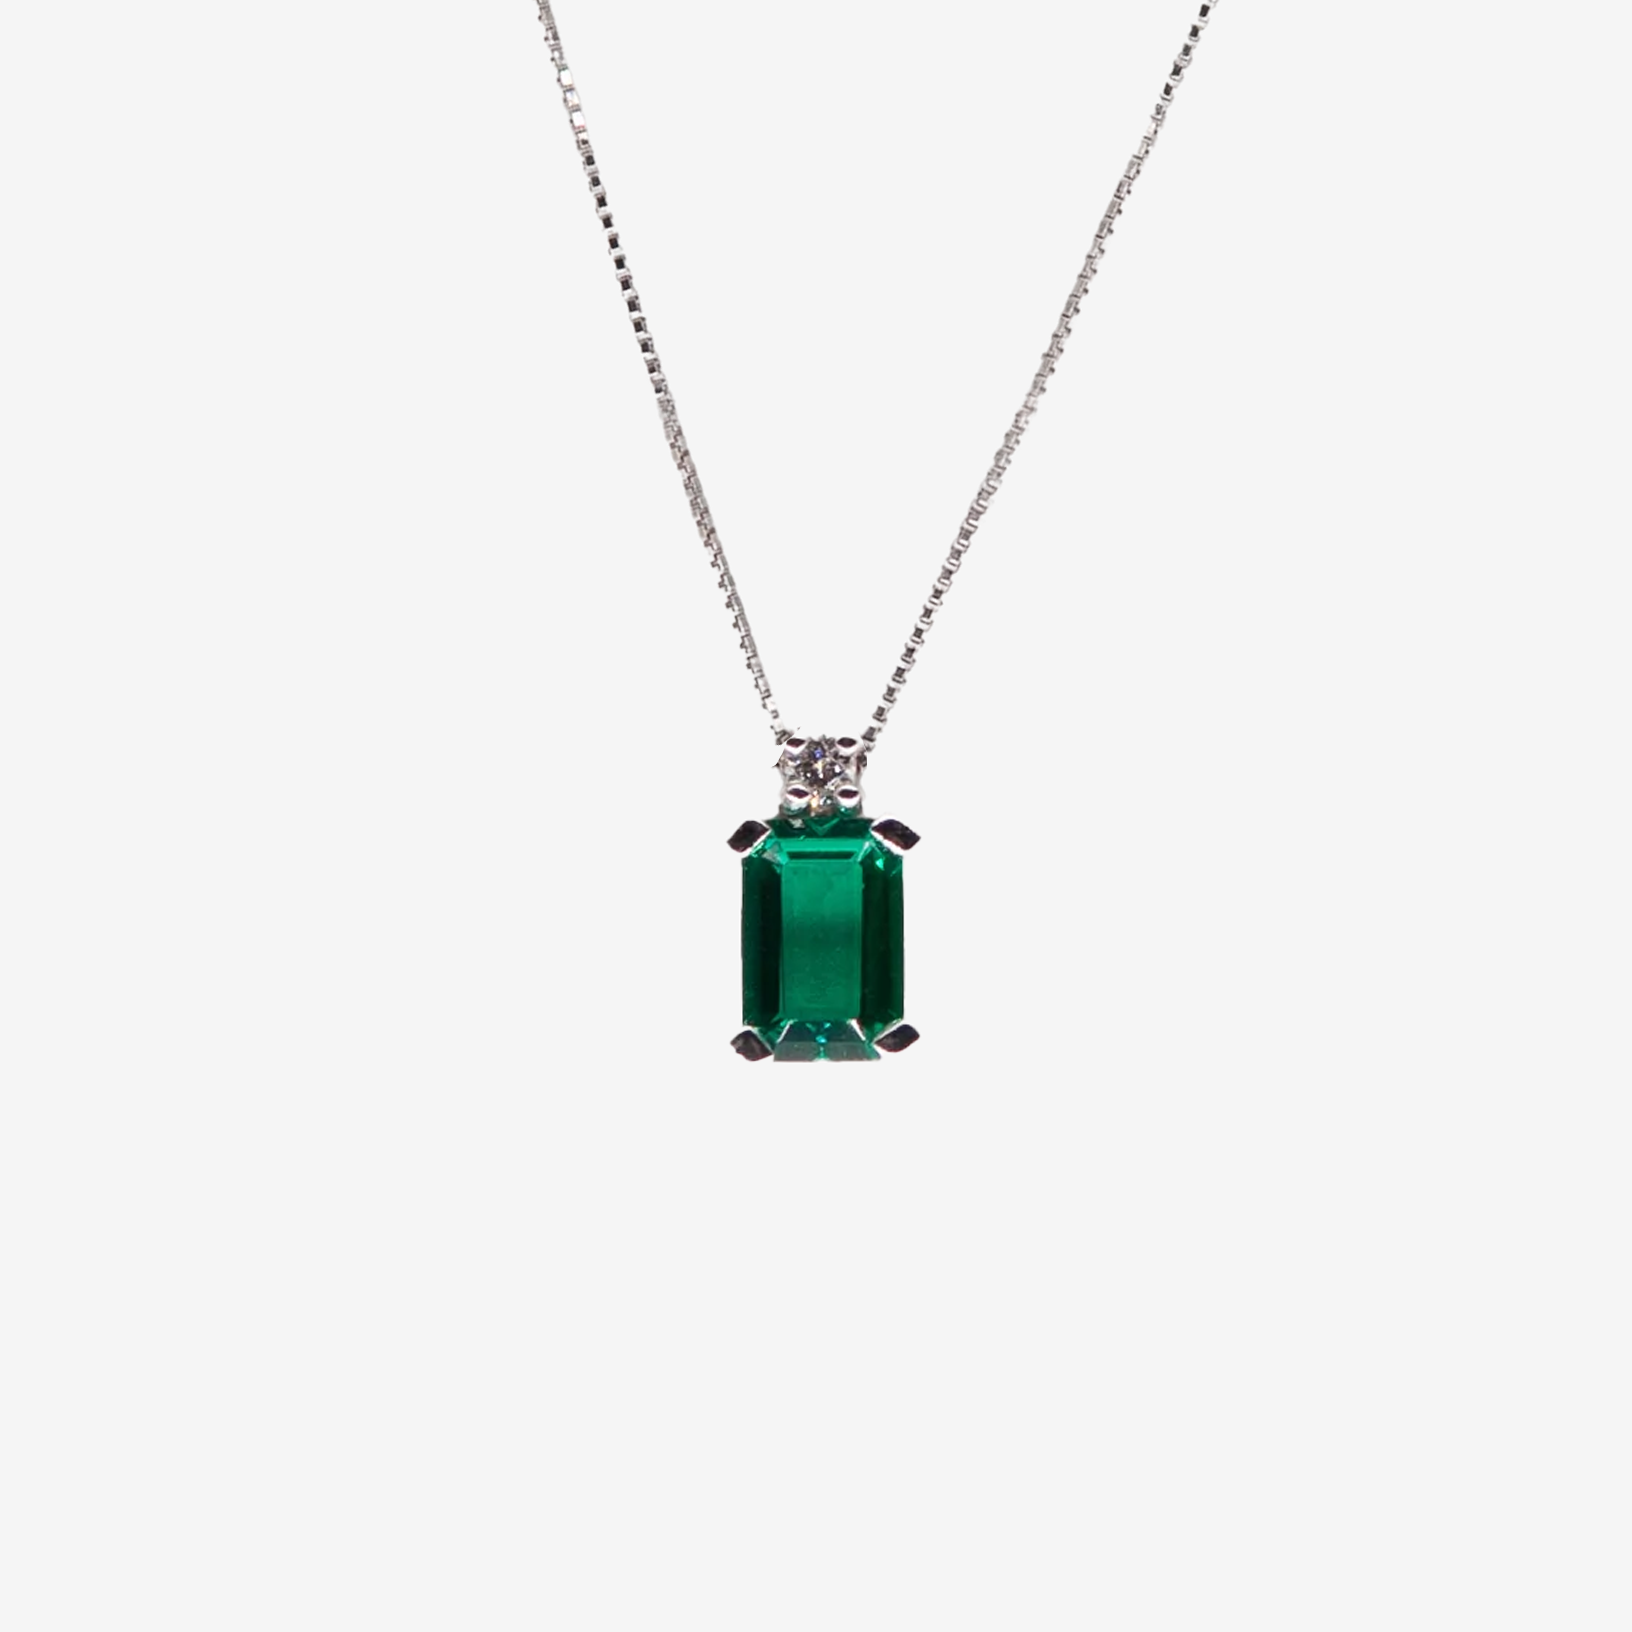 Sophie necklace with emerald and diamonds